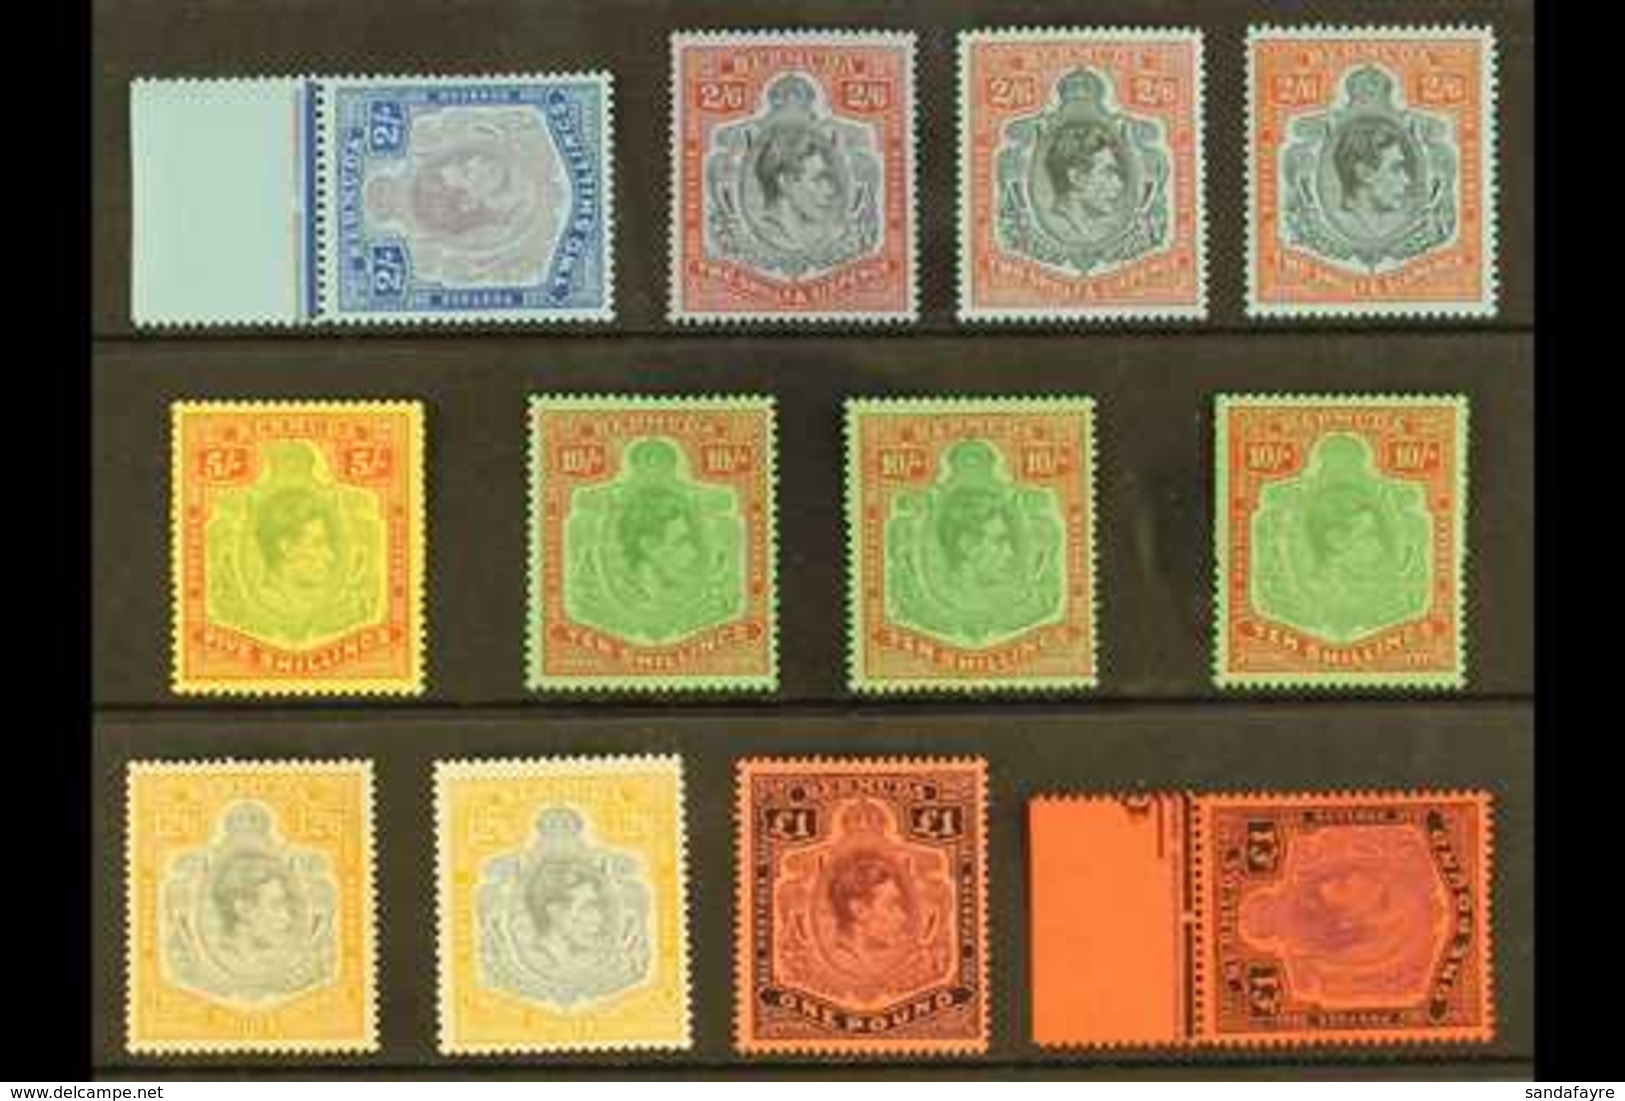 1938-53 KING GEORGE VI KEY TYPES A Very Fine Mint Or Never Hinged Mint Group With 2s Perf 13 Ord Paper, SG 116e (NHM), 2 - Bermudes